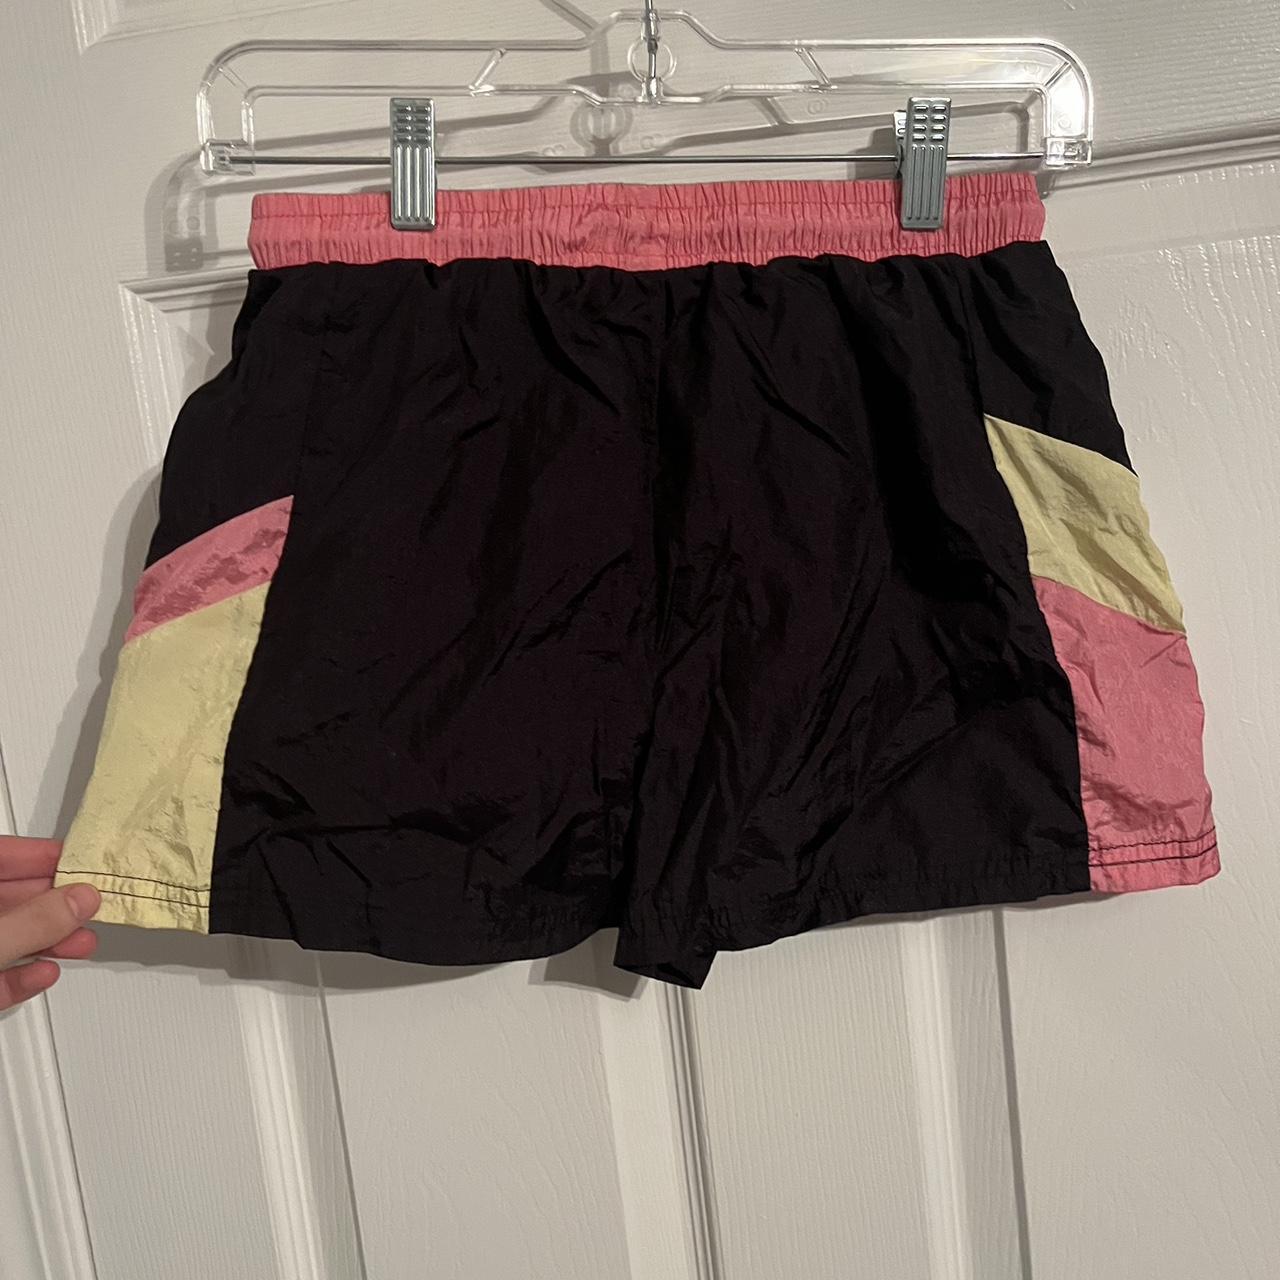 Ellesse Women's Pink and Yellow Shorts (2)